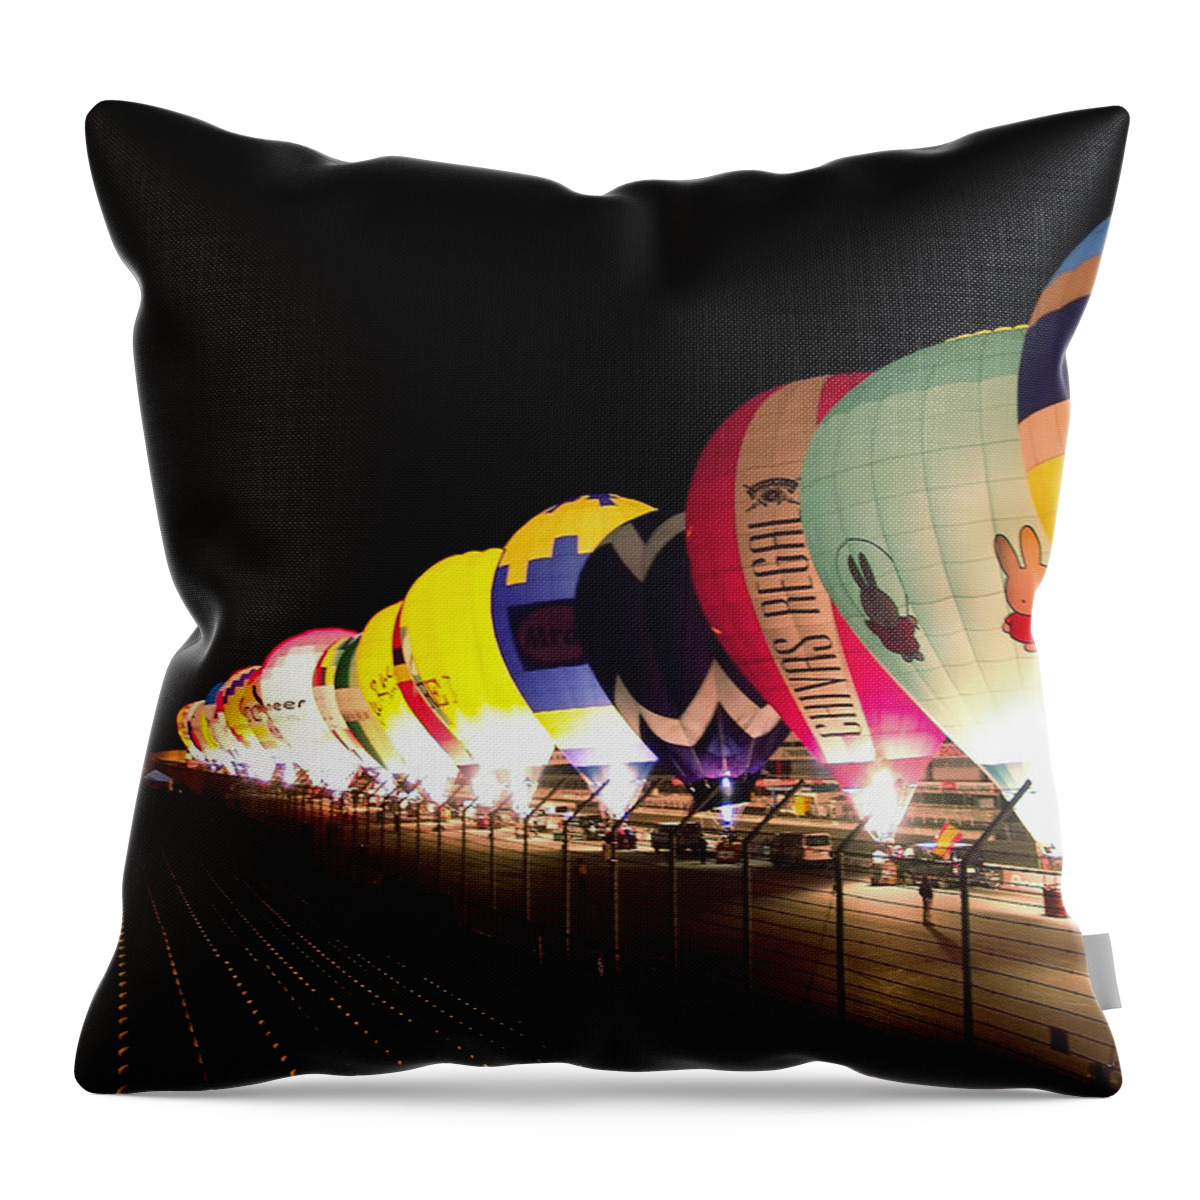 Balloon Air Hot Sky Flight Fly Sport Hot Air Balloon Basket Fun Colourful Blue Transport Ballon Travel Adventure Transportation Summer Freedom Ballooning Colorful Leisure Colours High Ride Recreation Color Bright Airship Flying Throw Pillow featuring the photograph Balloon Glow by John Swartz